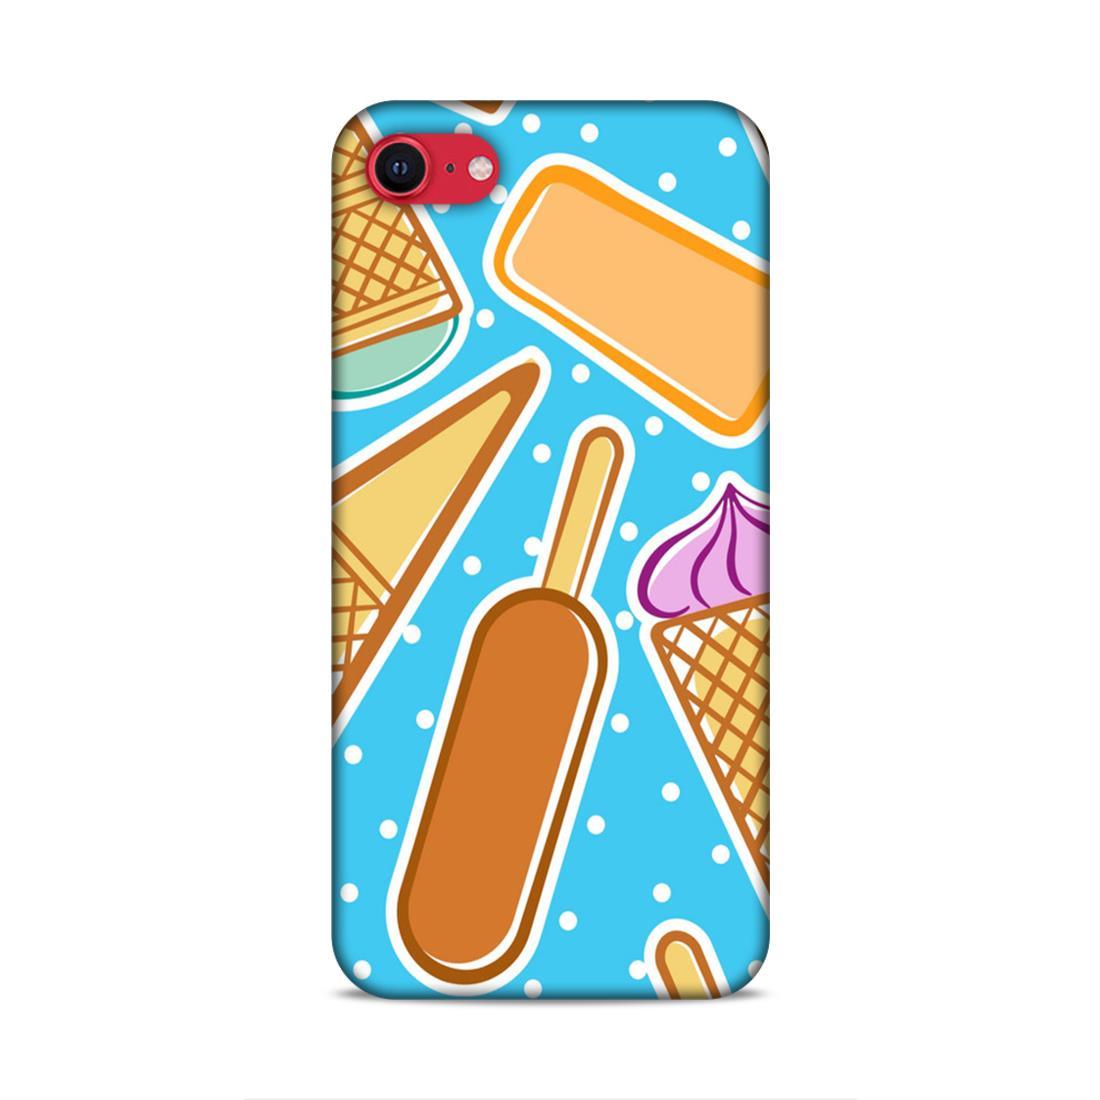 Candy Corn Blue iPhone SE 2020 Mobile Cover Case